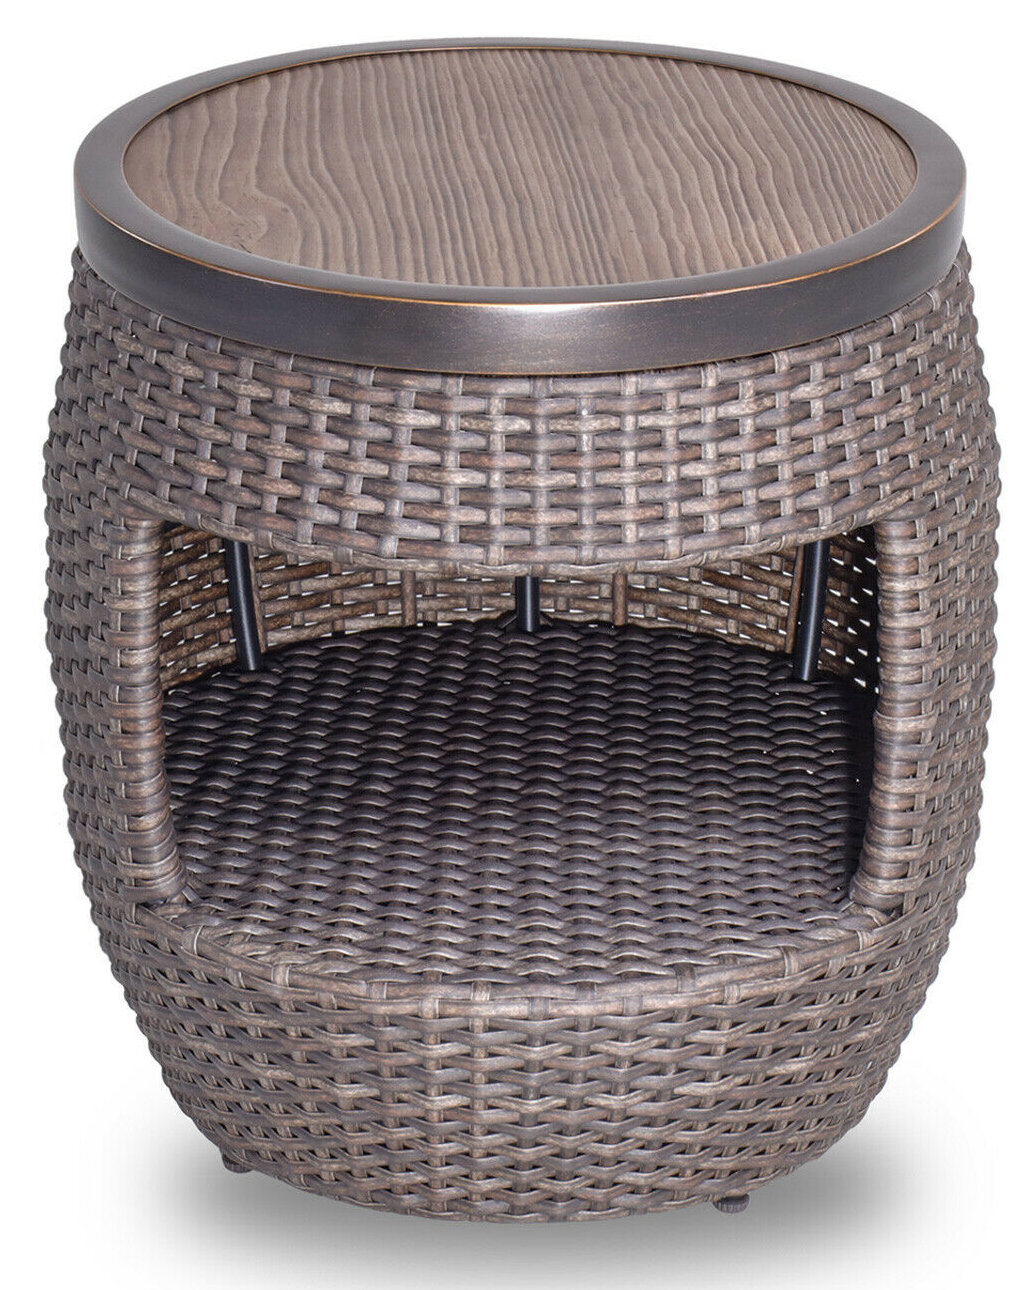 Round Wicker Coffee Table Outdoor - Costway Round Rattan Wicker Coffee